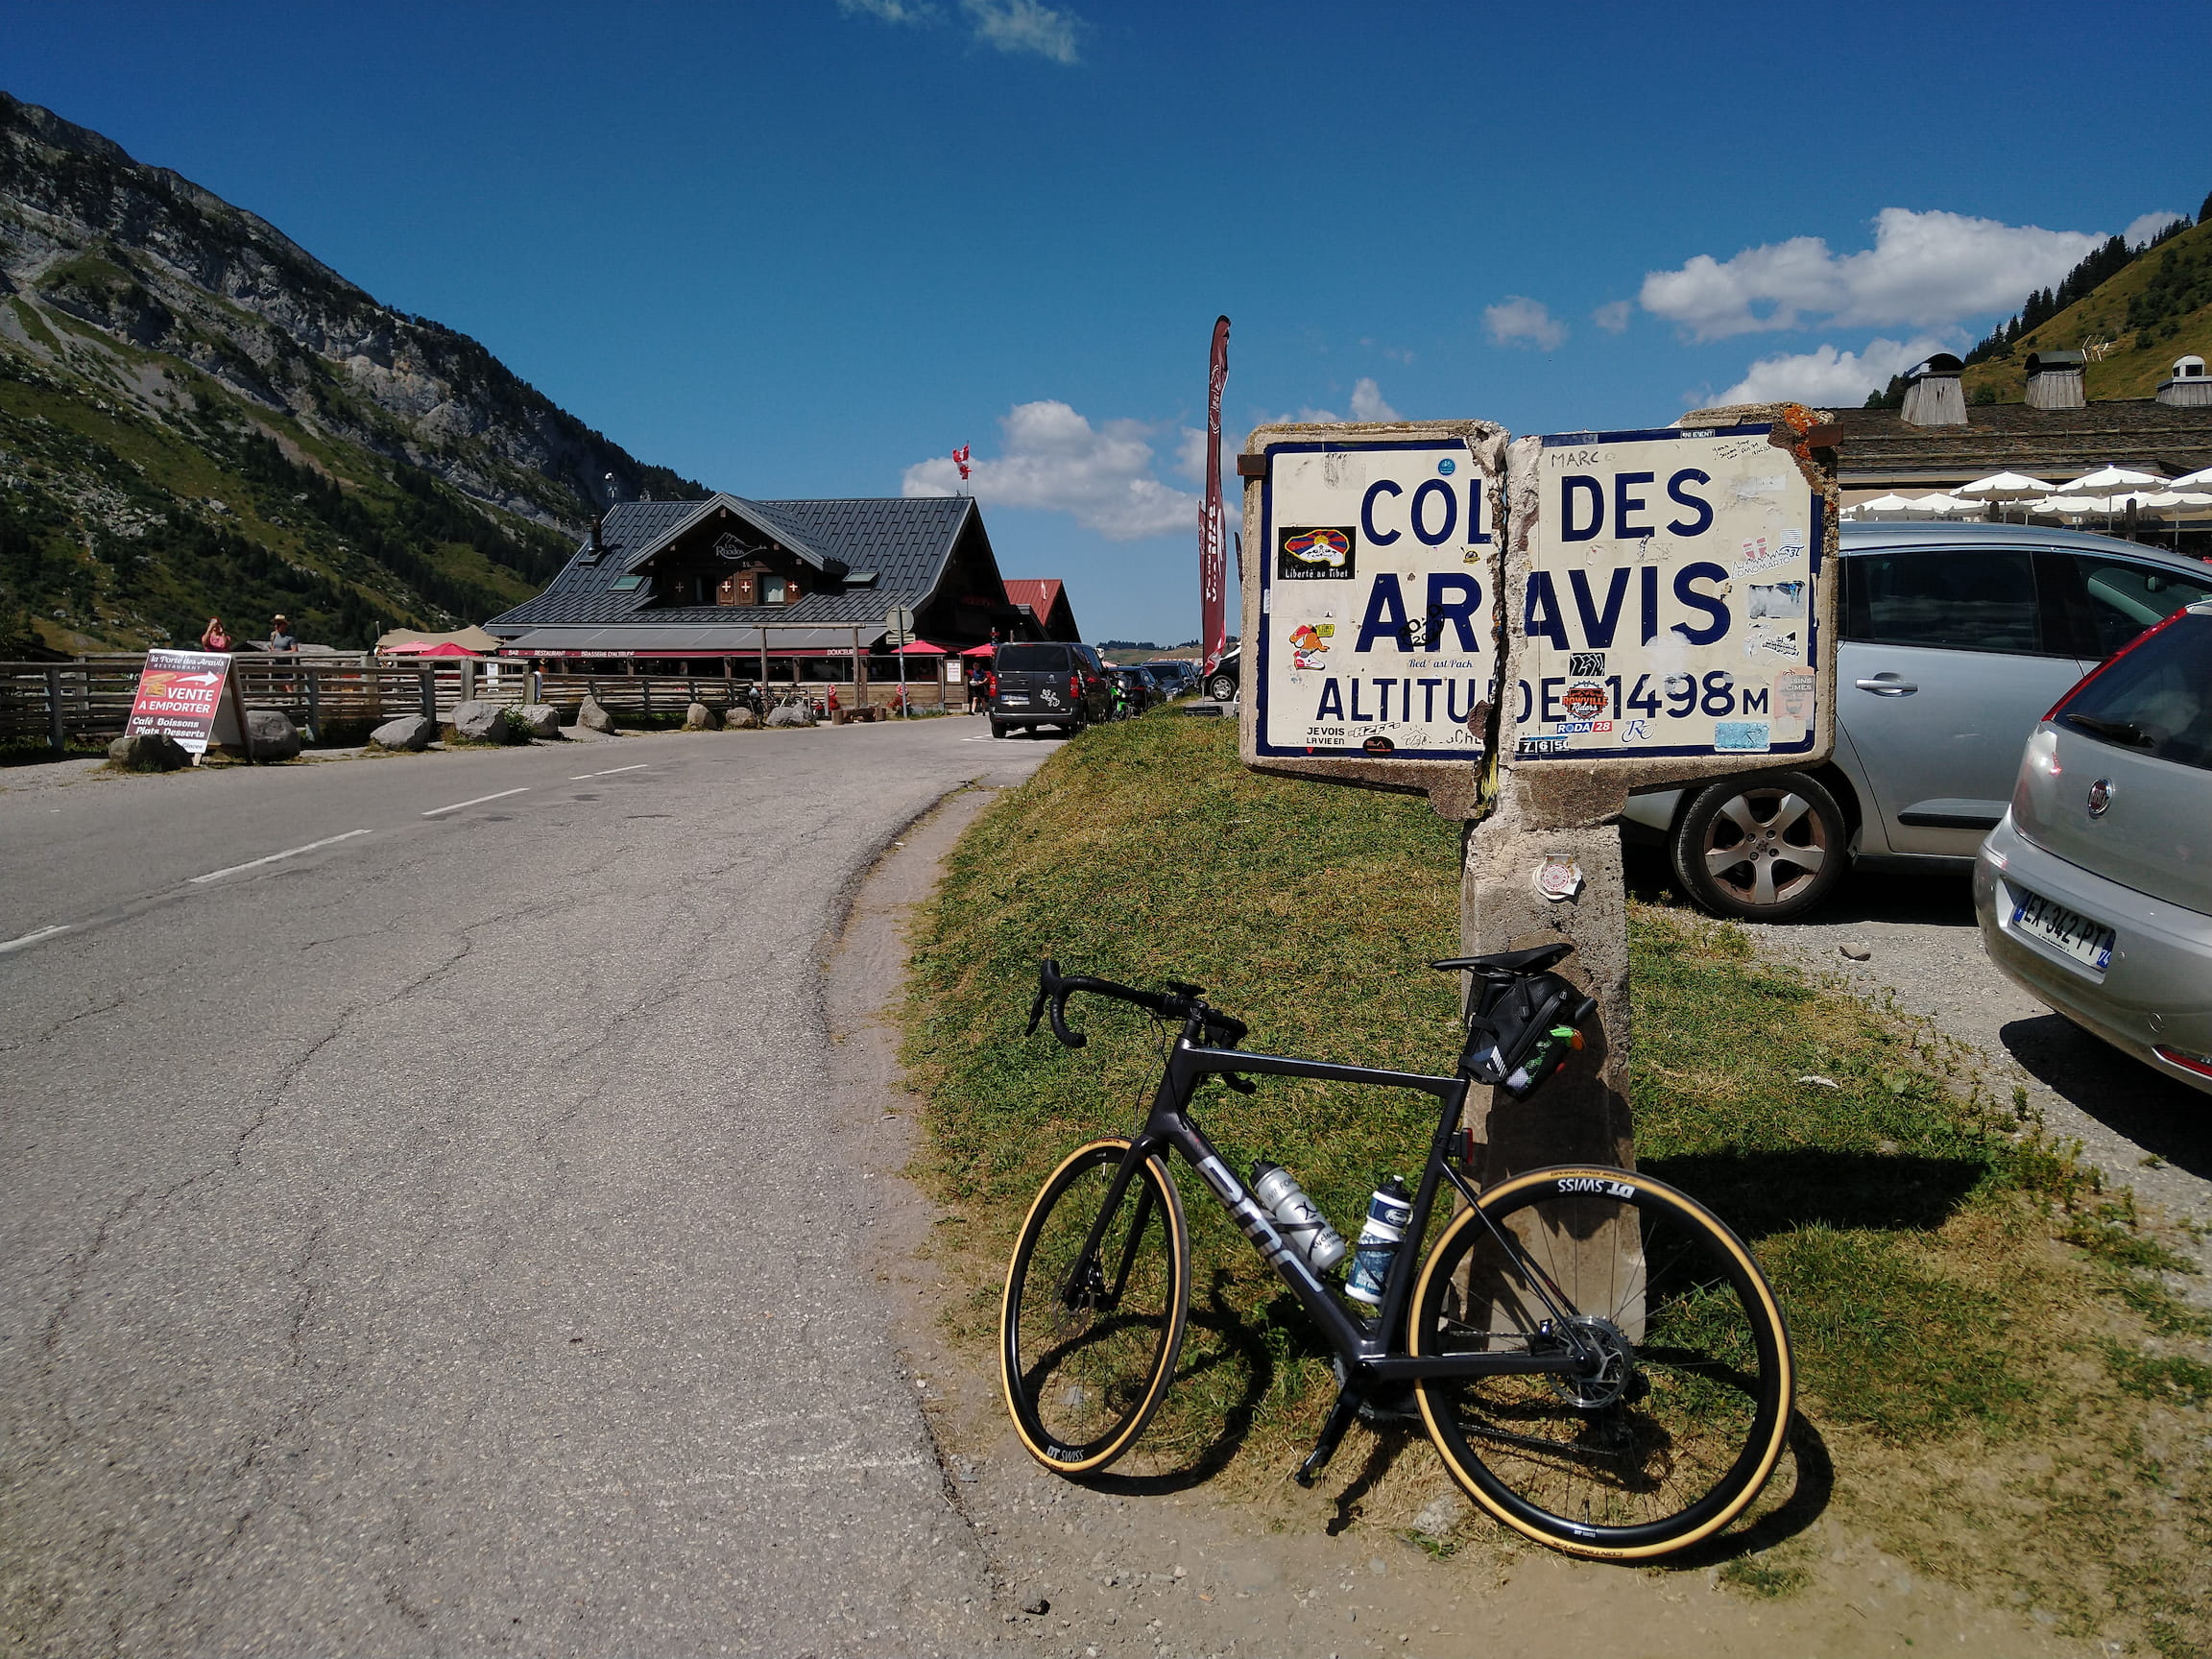 At the top of Col des Aravis